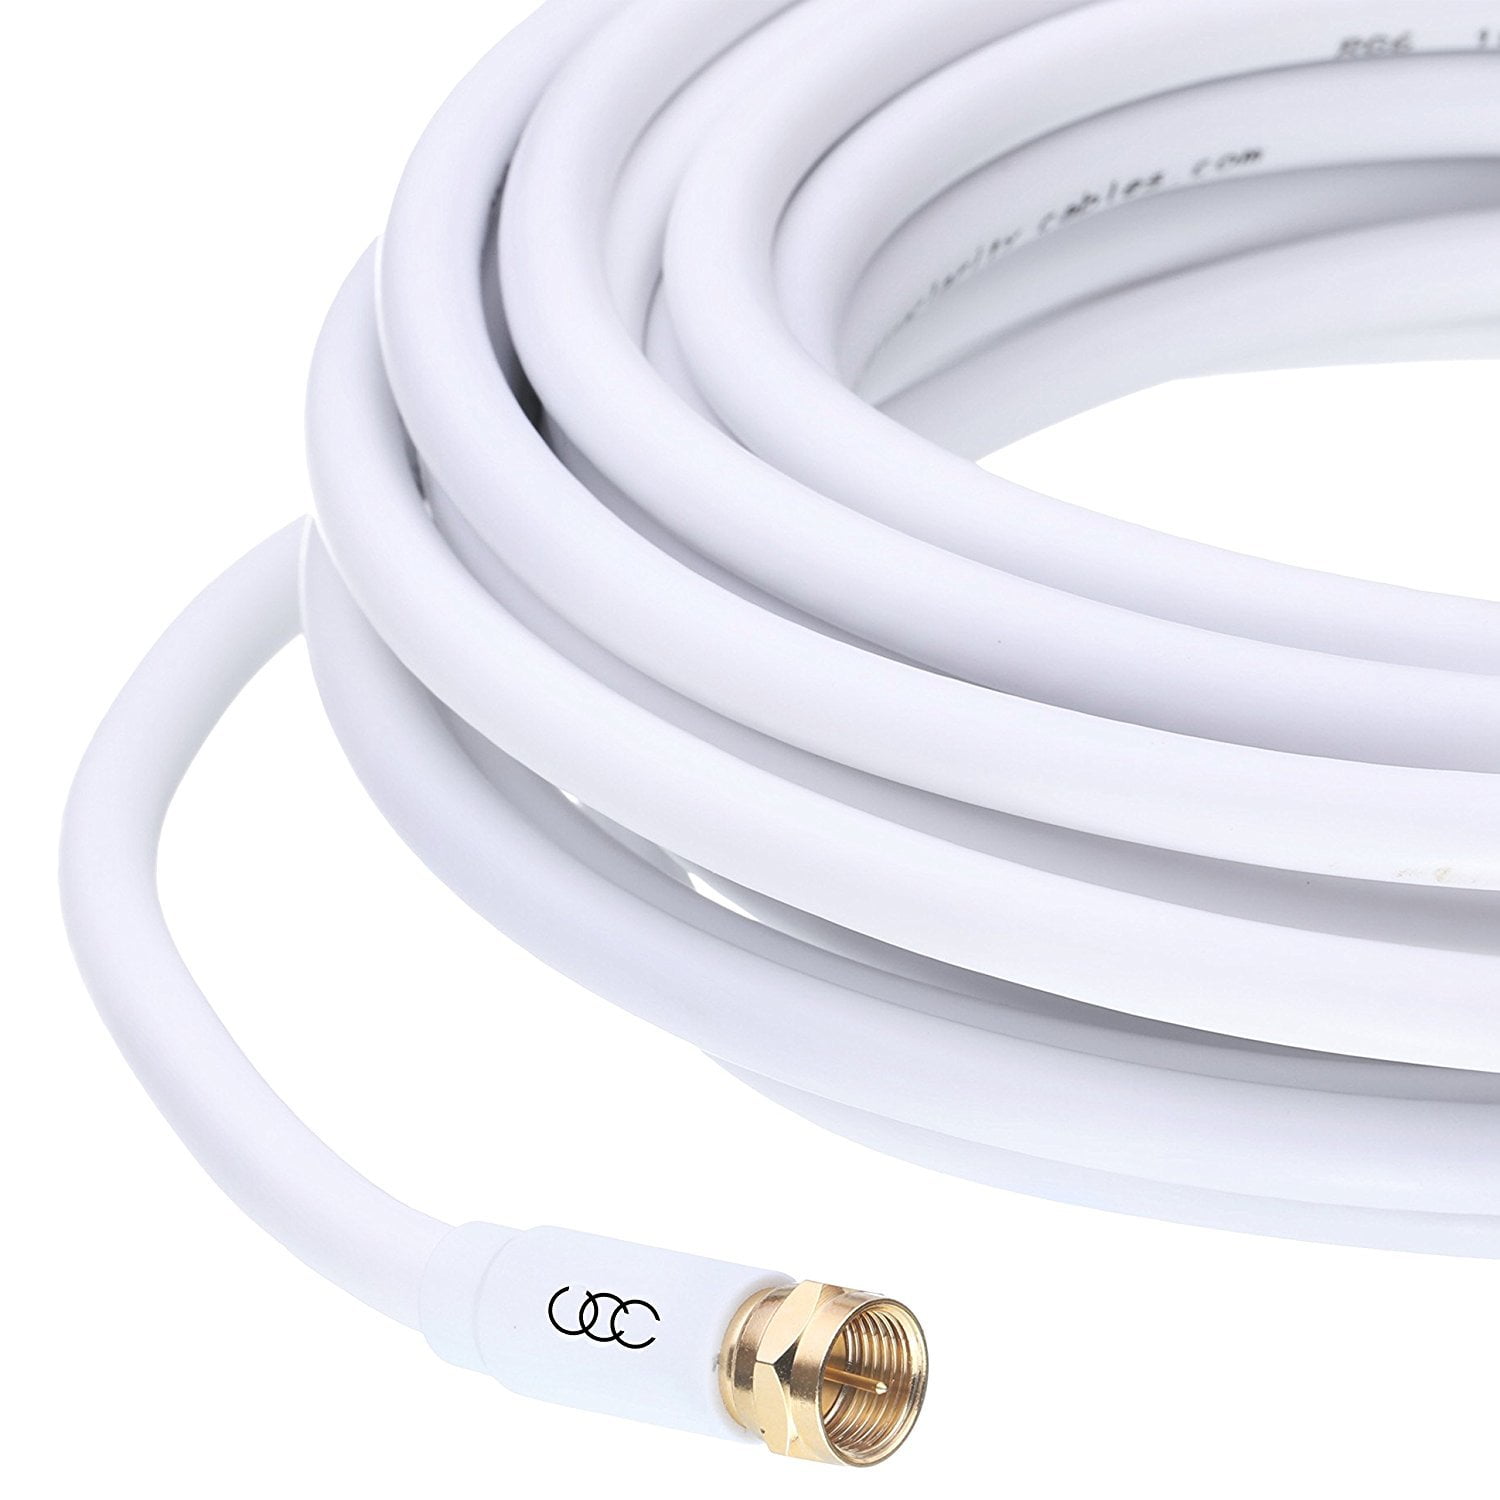 Coaxial Cable Triple Shielded CL3 In-Wall Rated Gold Plated Connectors  (6ft) RG6 Digital Audio Video with Male F Connector Pin - 6 Feet -  Walmart.com